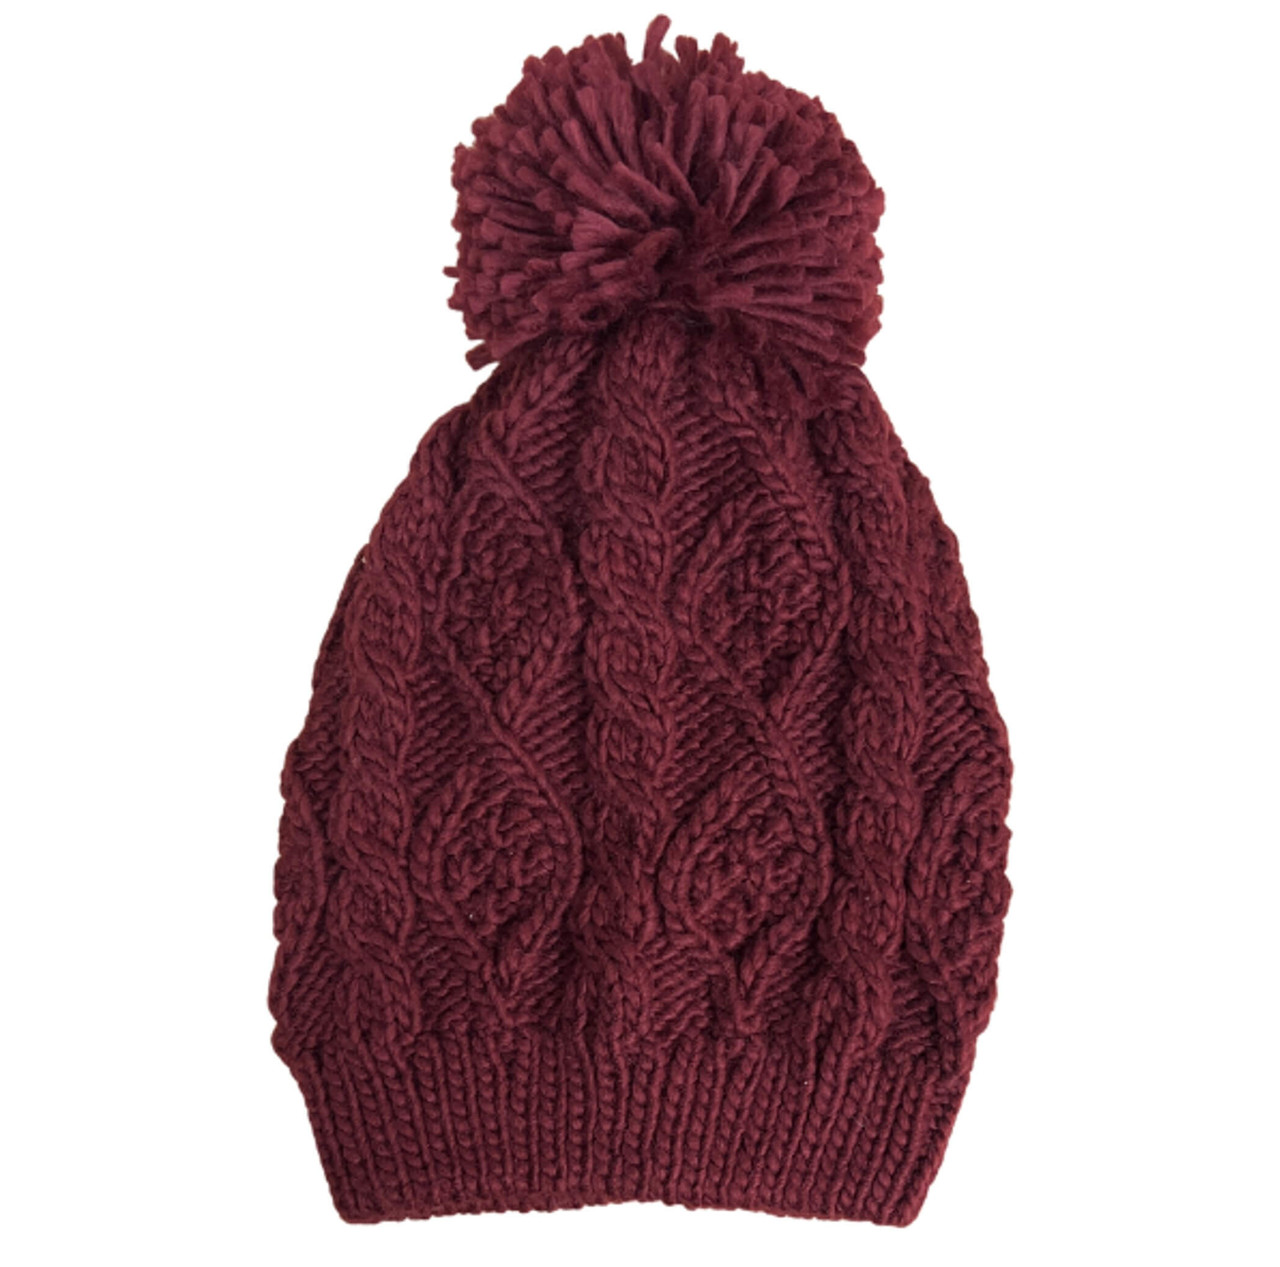 Lou and Co L.I.B. New York Cable Knit Beanie Winter Hat with Pom Burgundy